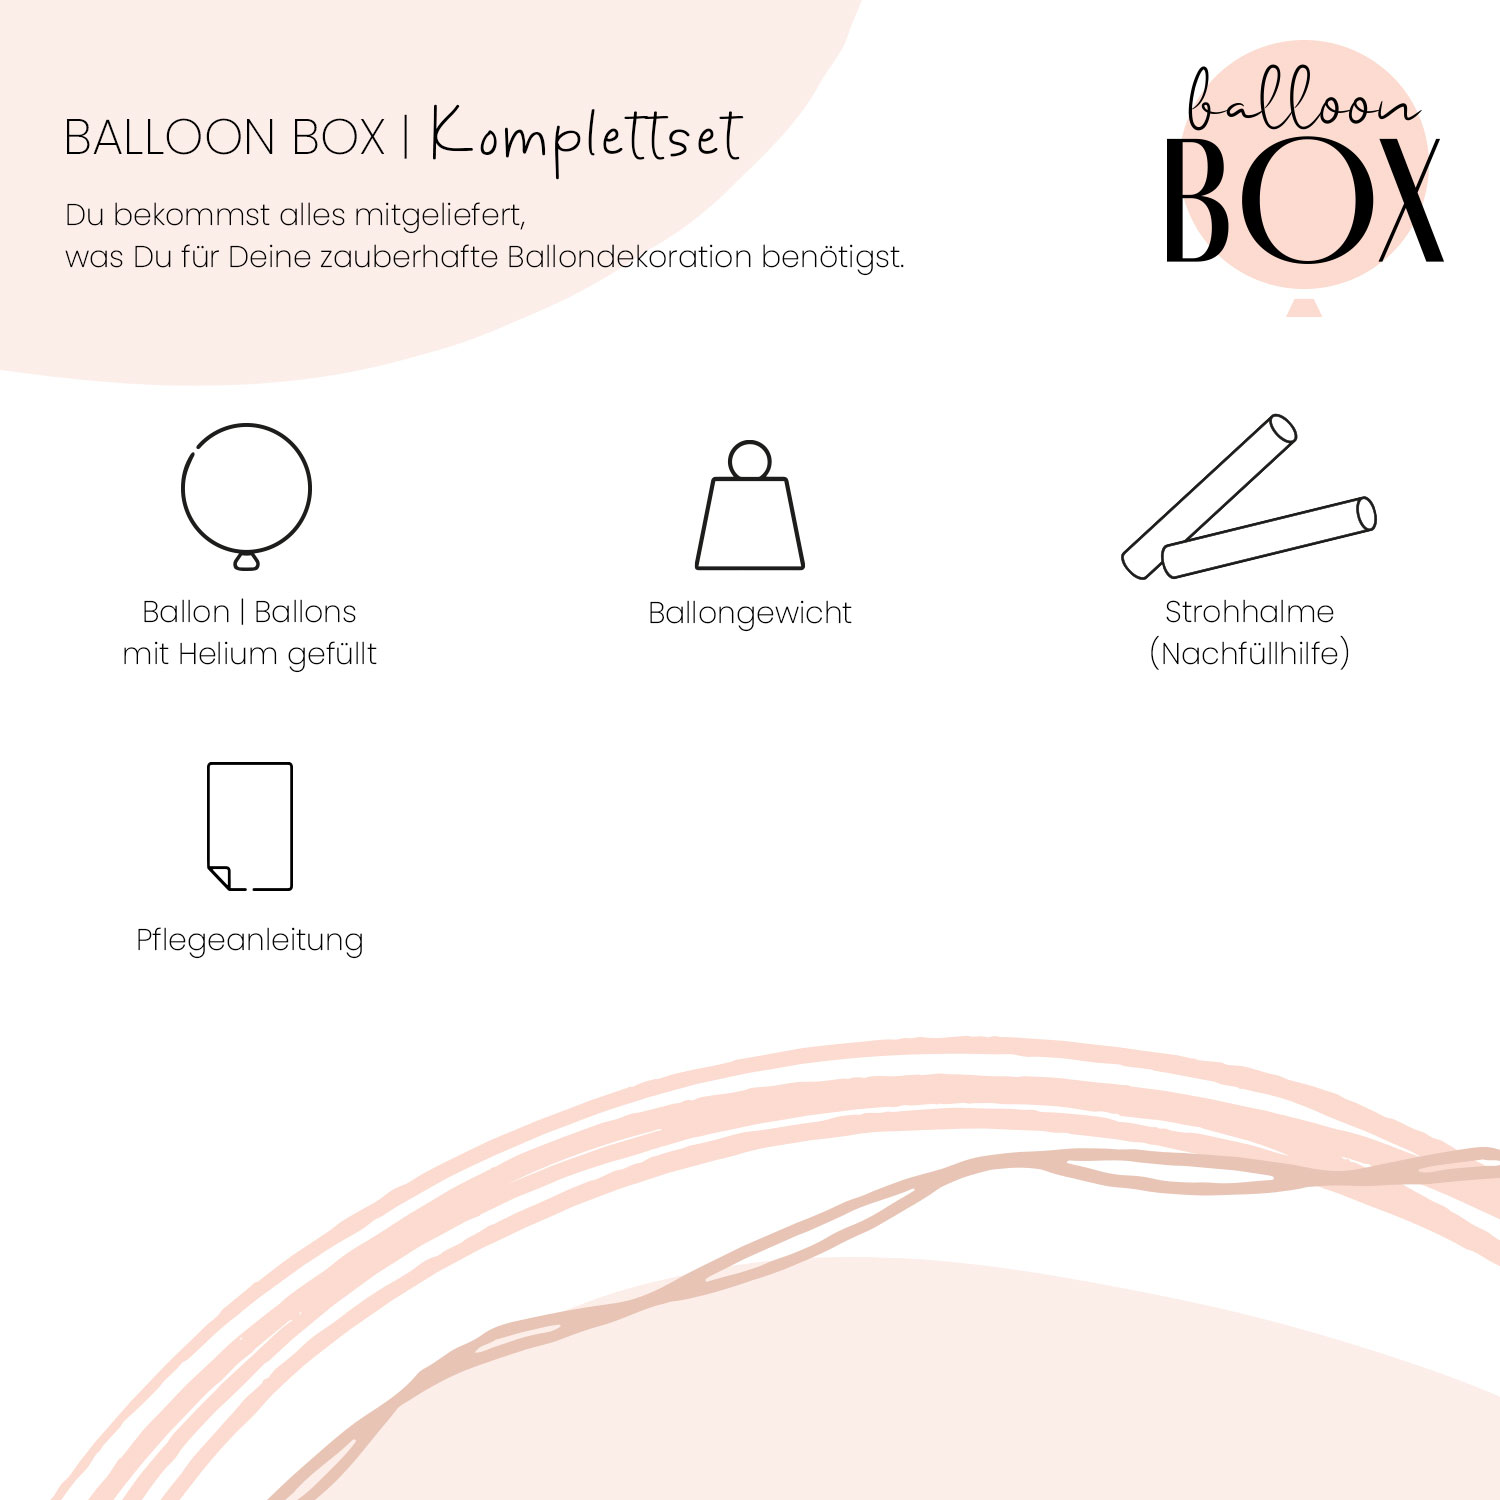 Heliumballon in a Box - Pretty in Pink - Five